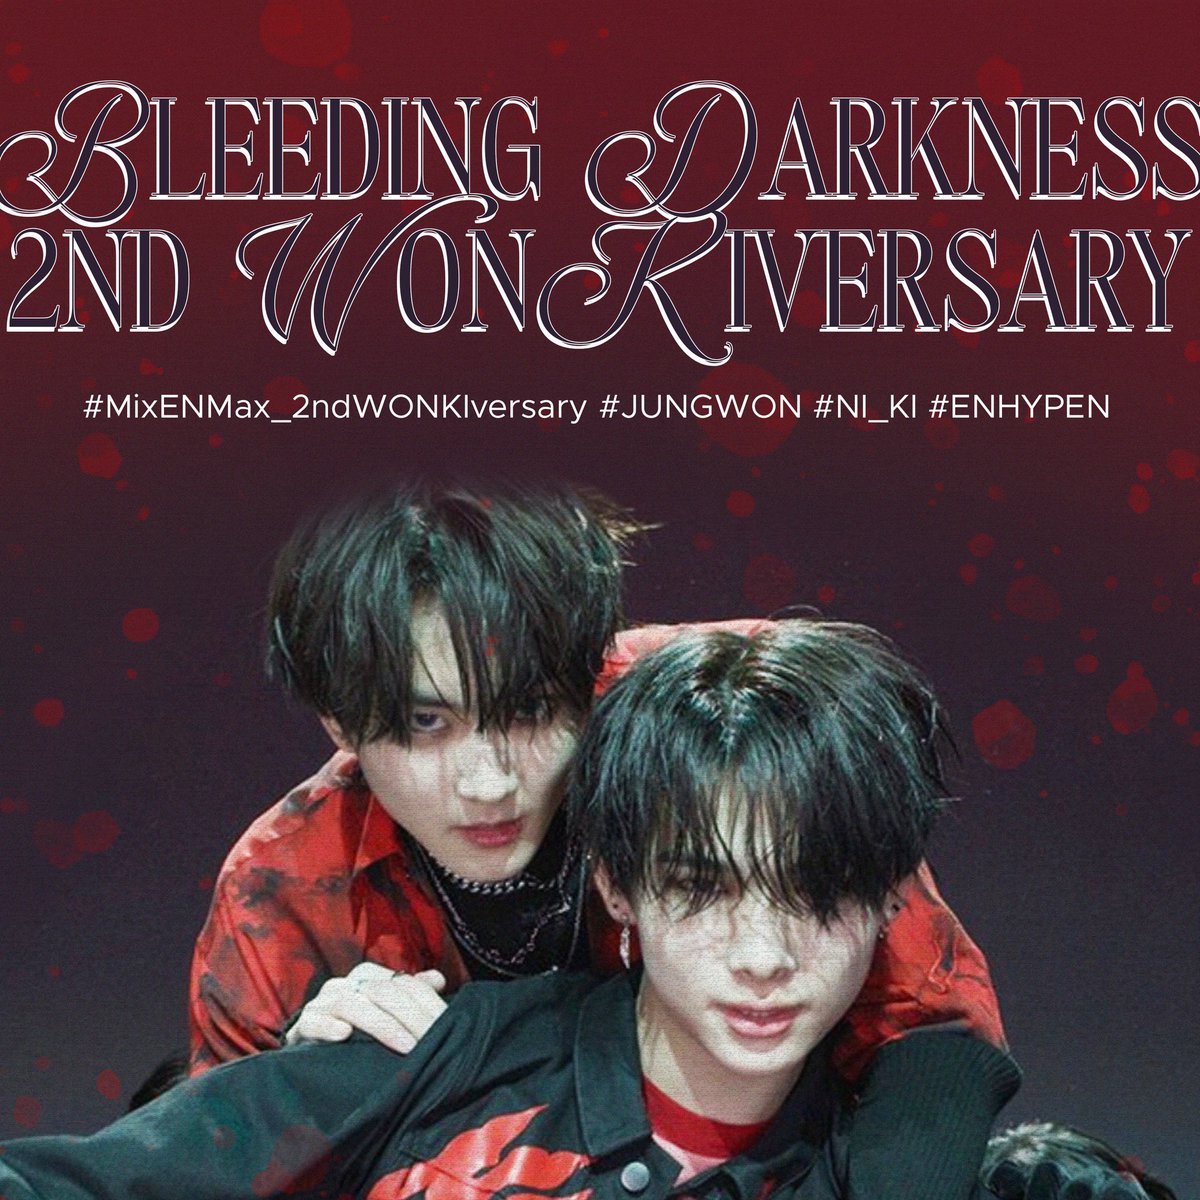 Two years ago, Jungwon and Ni-ki captivated us with their breathtaking performance during Mix & Match, leaving a lasting impression that continues to inspire us to this day. Join us in celebrating this milestone and the remarkable journey these two extraordinary artists have